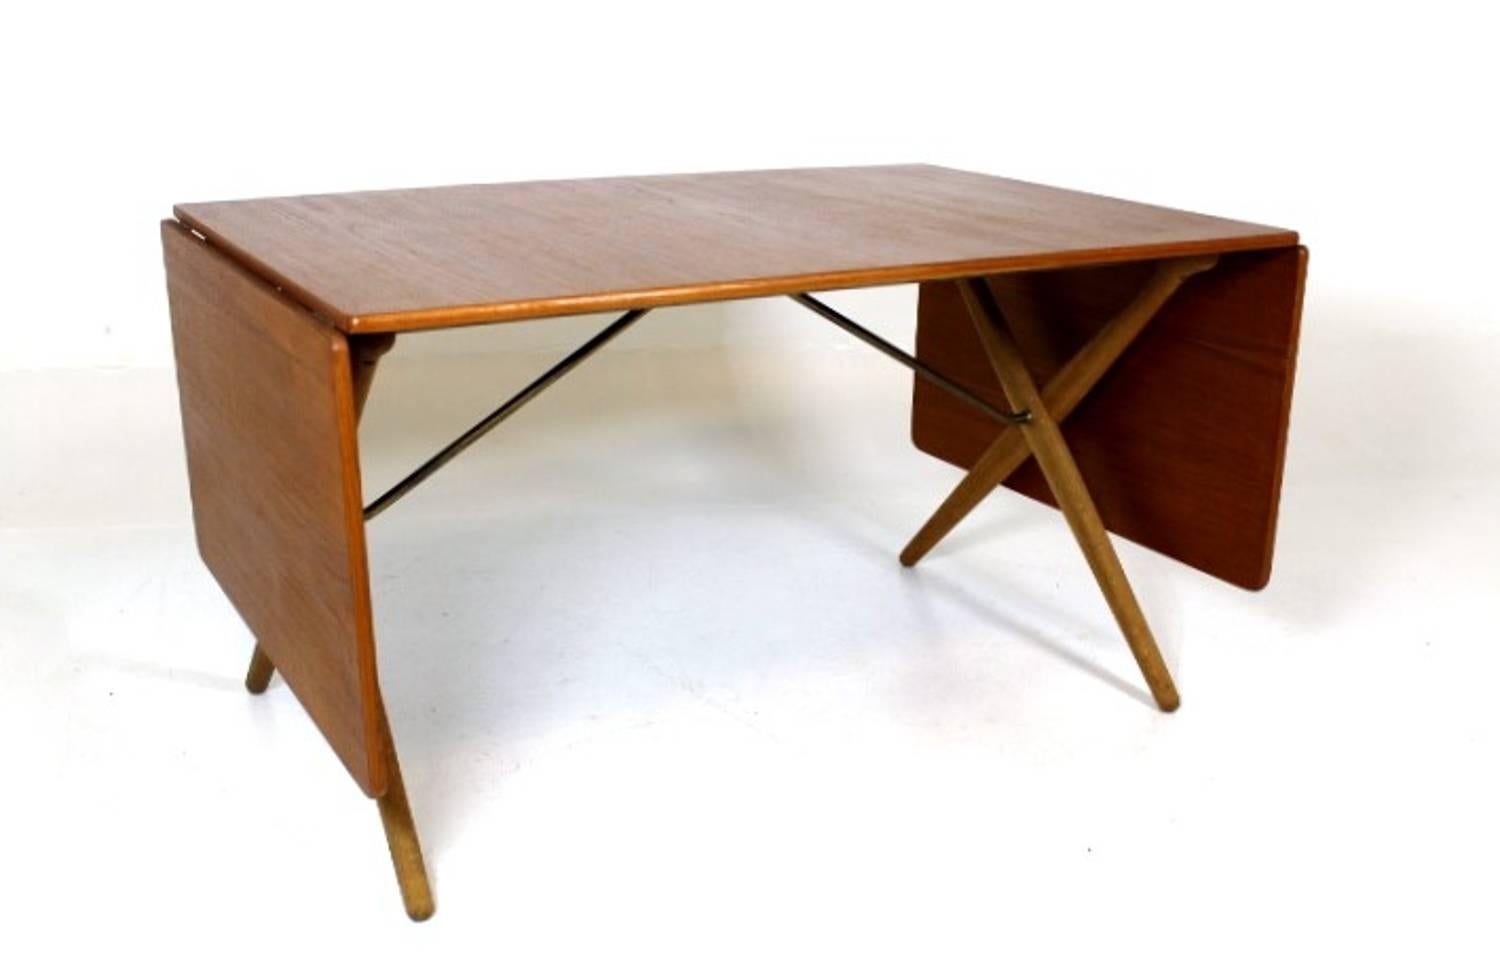 Great dining table, designed by Hans J. Wegner 1952, Model AT-309. Manufactured by Andreas Tuck. Top in teak and legs in solid oak with brass trust base. Stamped with designer and maker. 
Measures: 128 + 50 + 50 = 228 cm long.